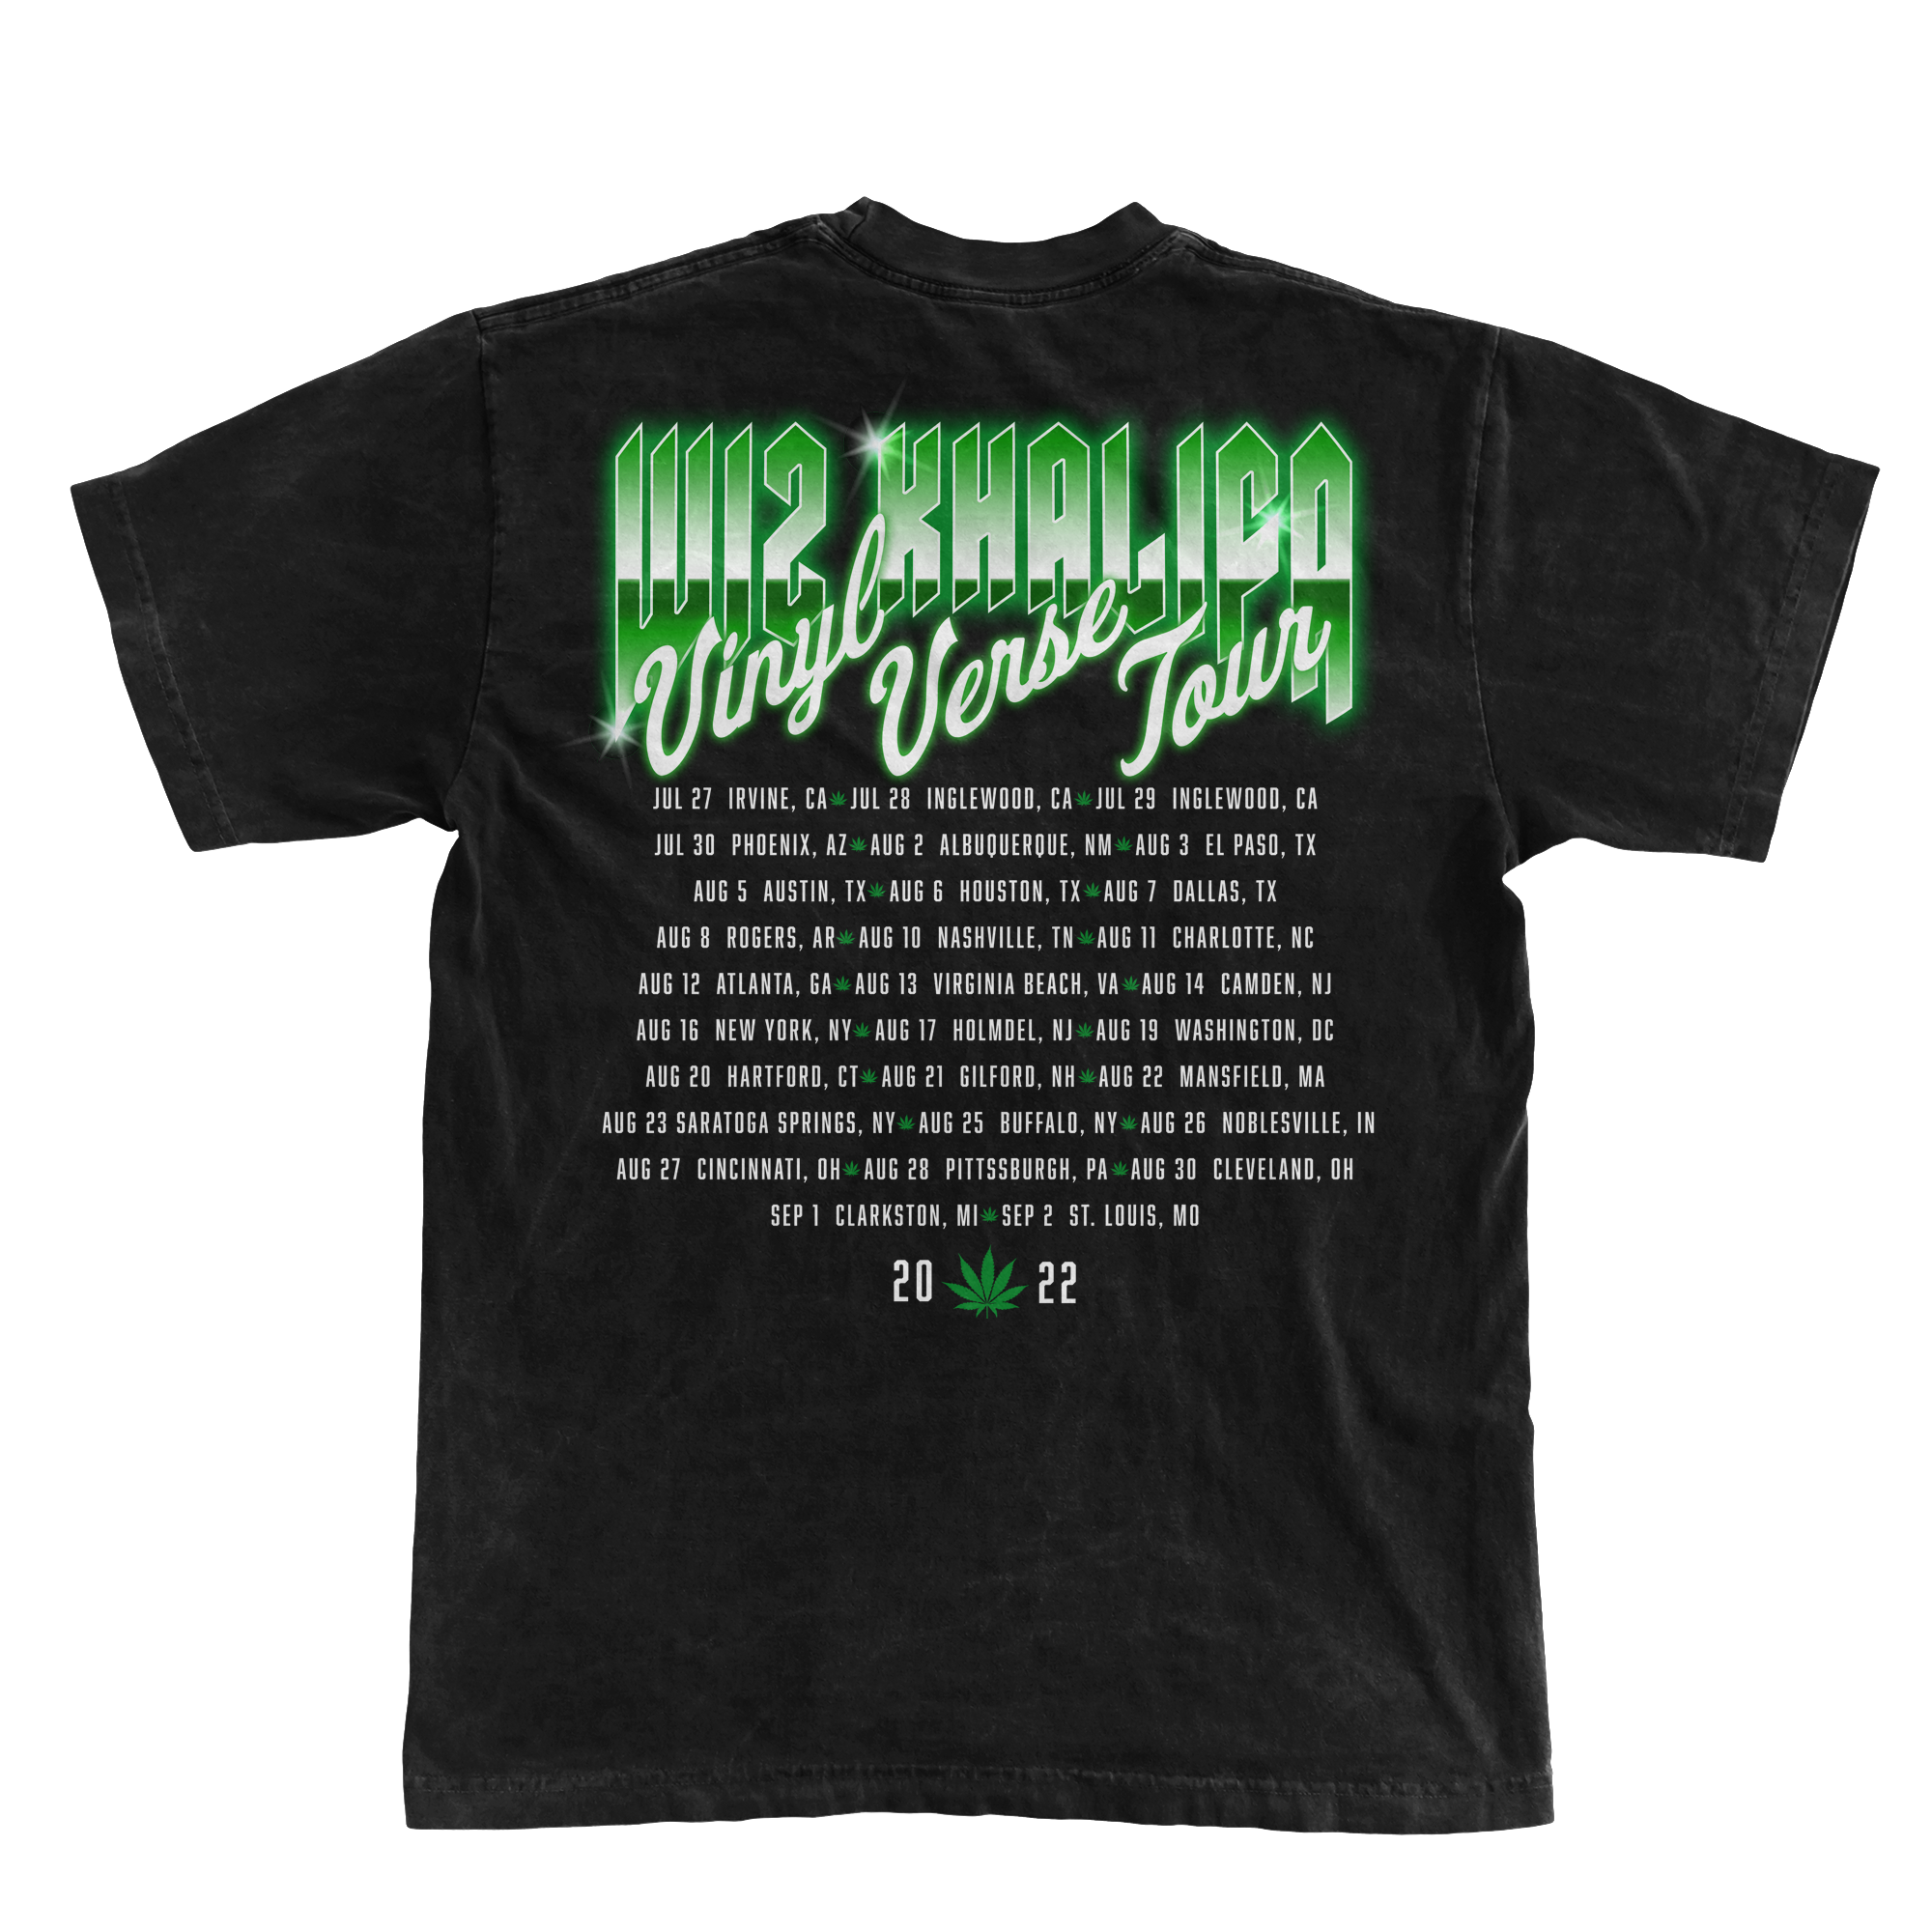 Wiz Khalifa | Official Site and Online Store